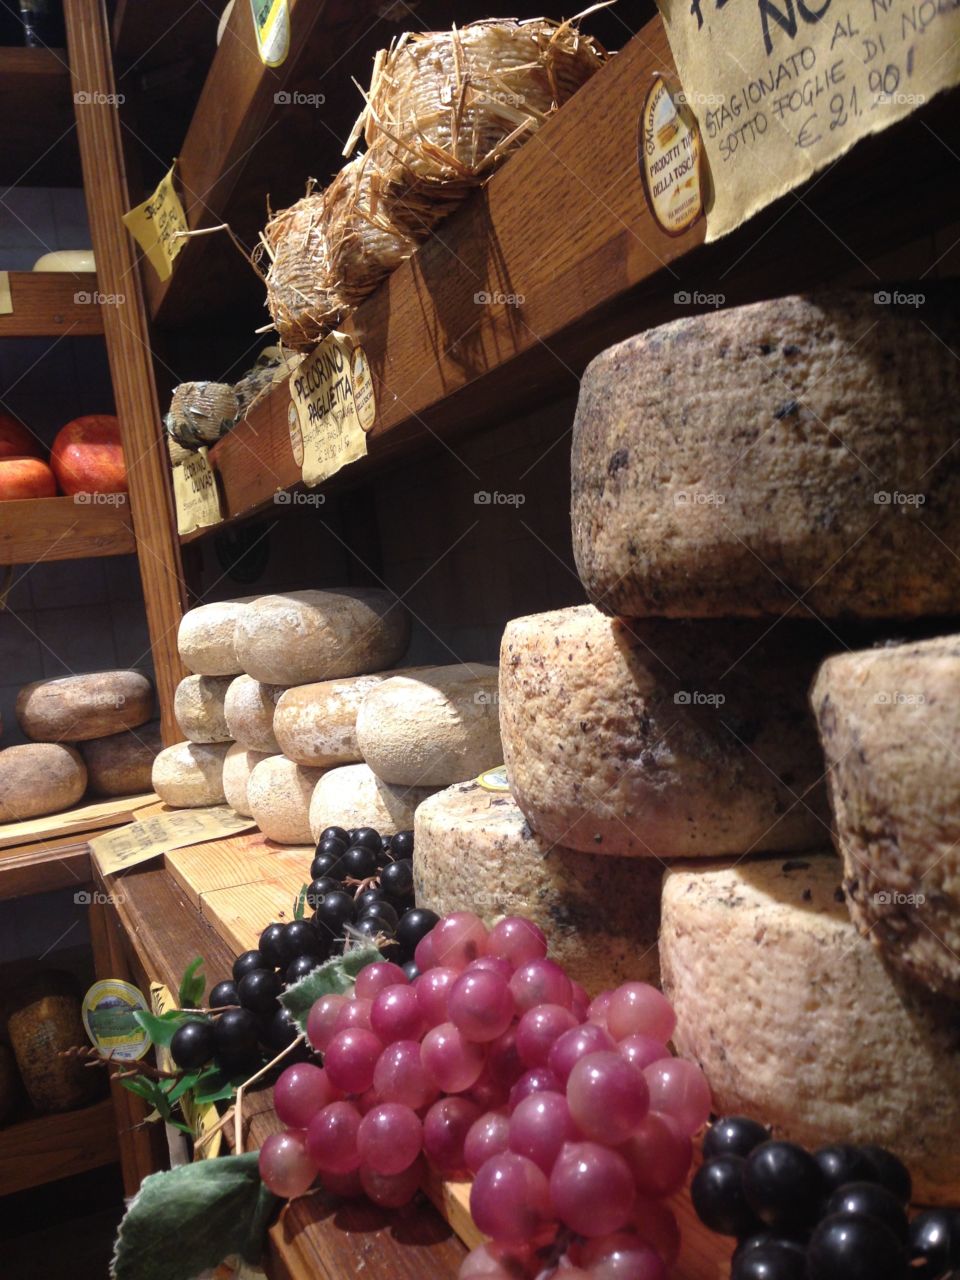 Cheese shops all over Tuscany 